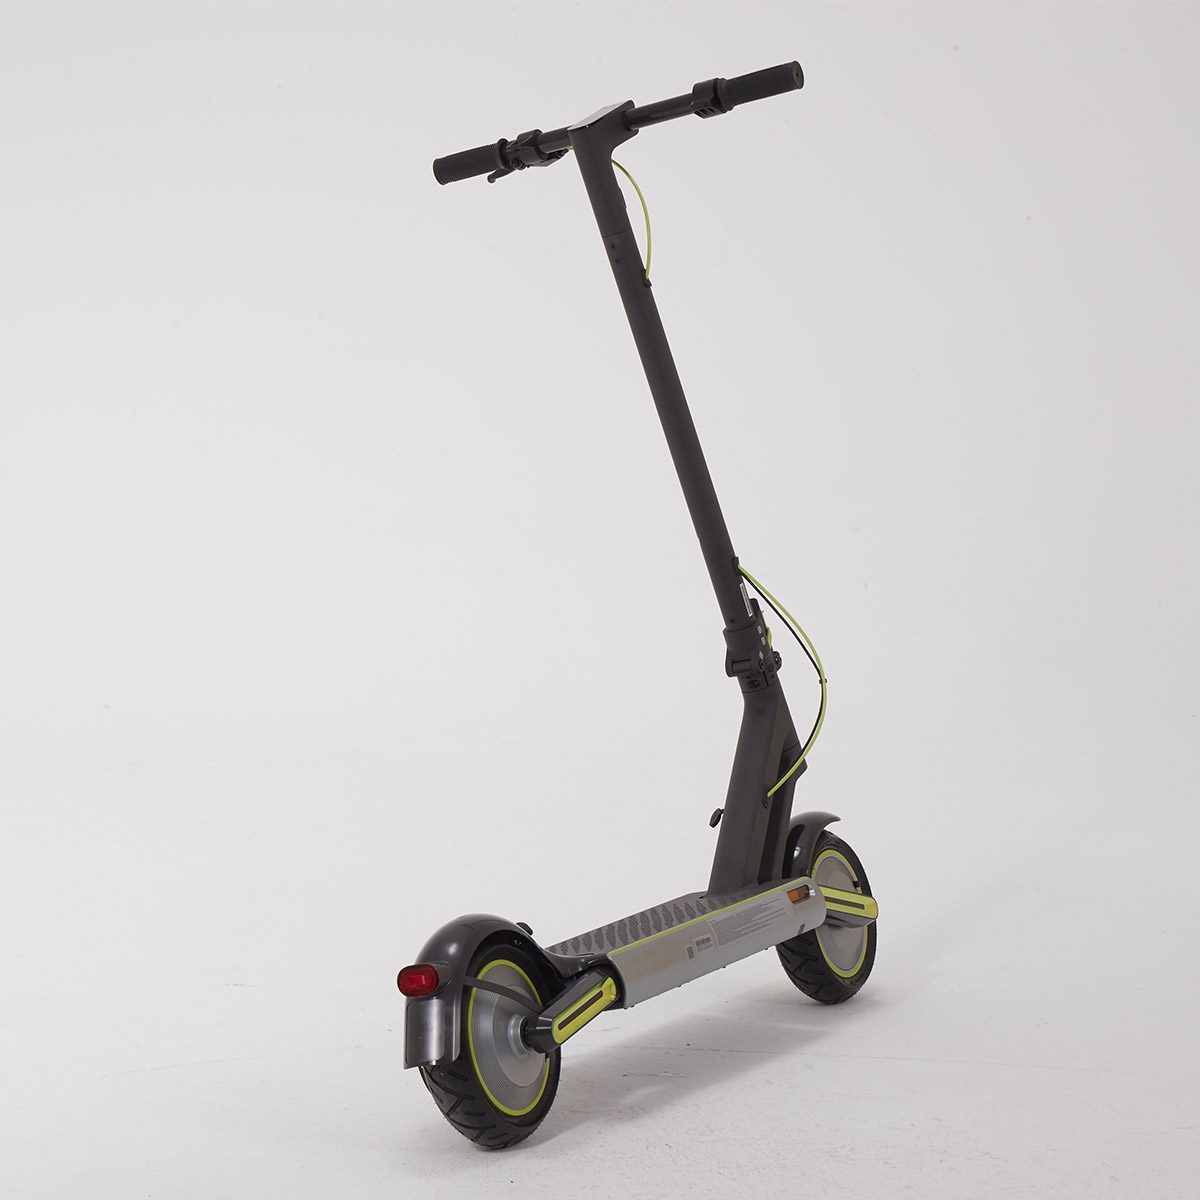 NAVEE Electric Scooter